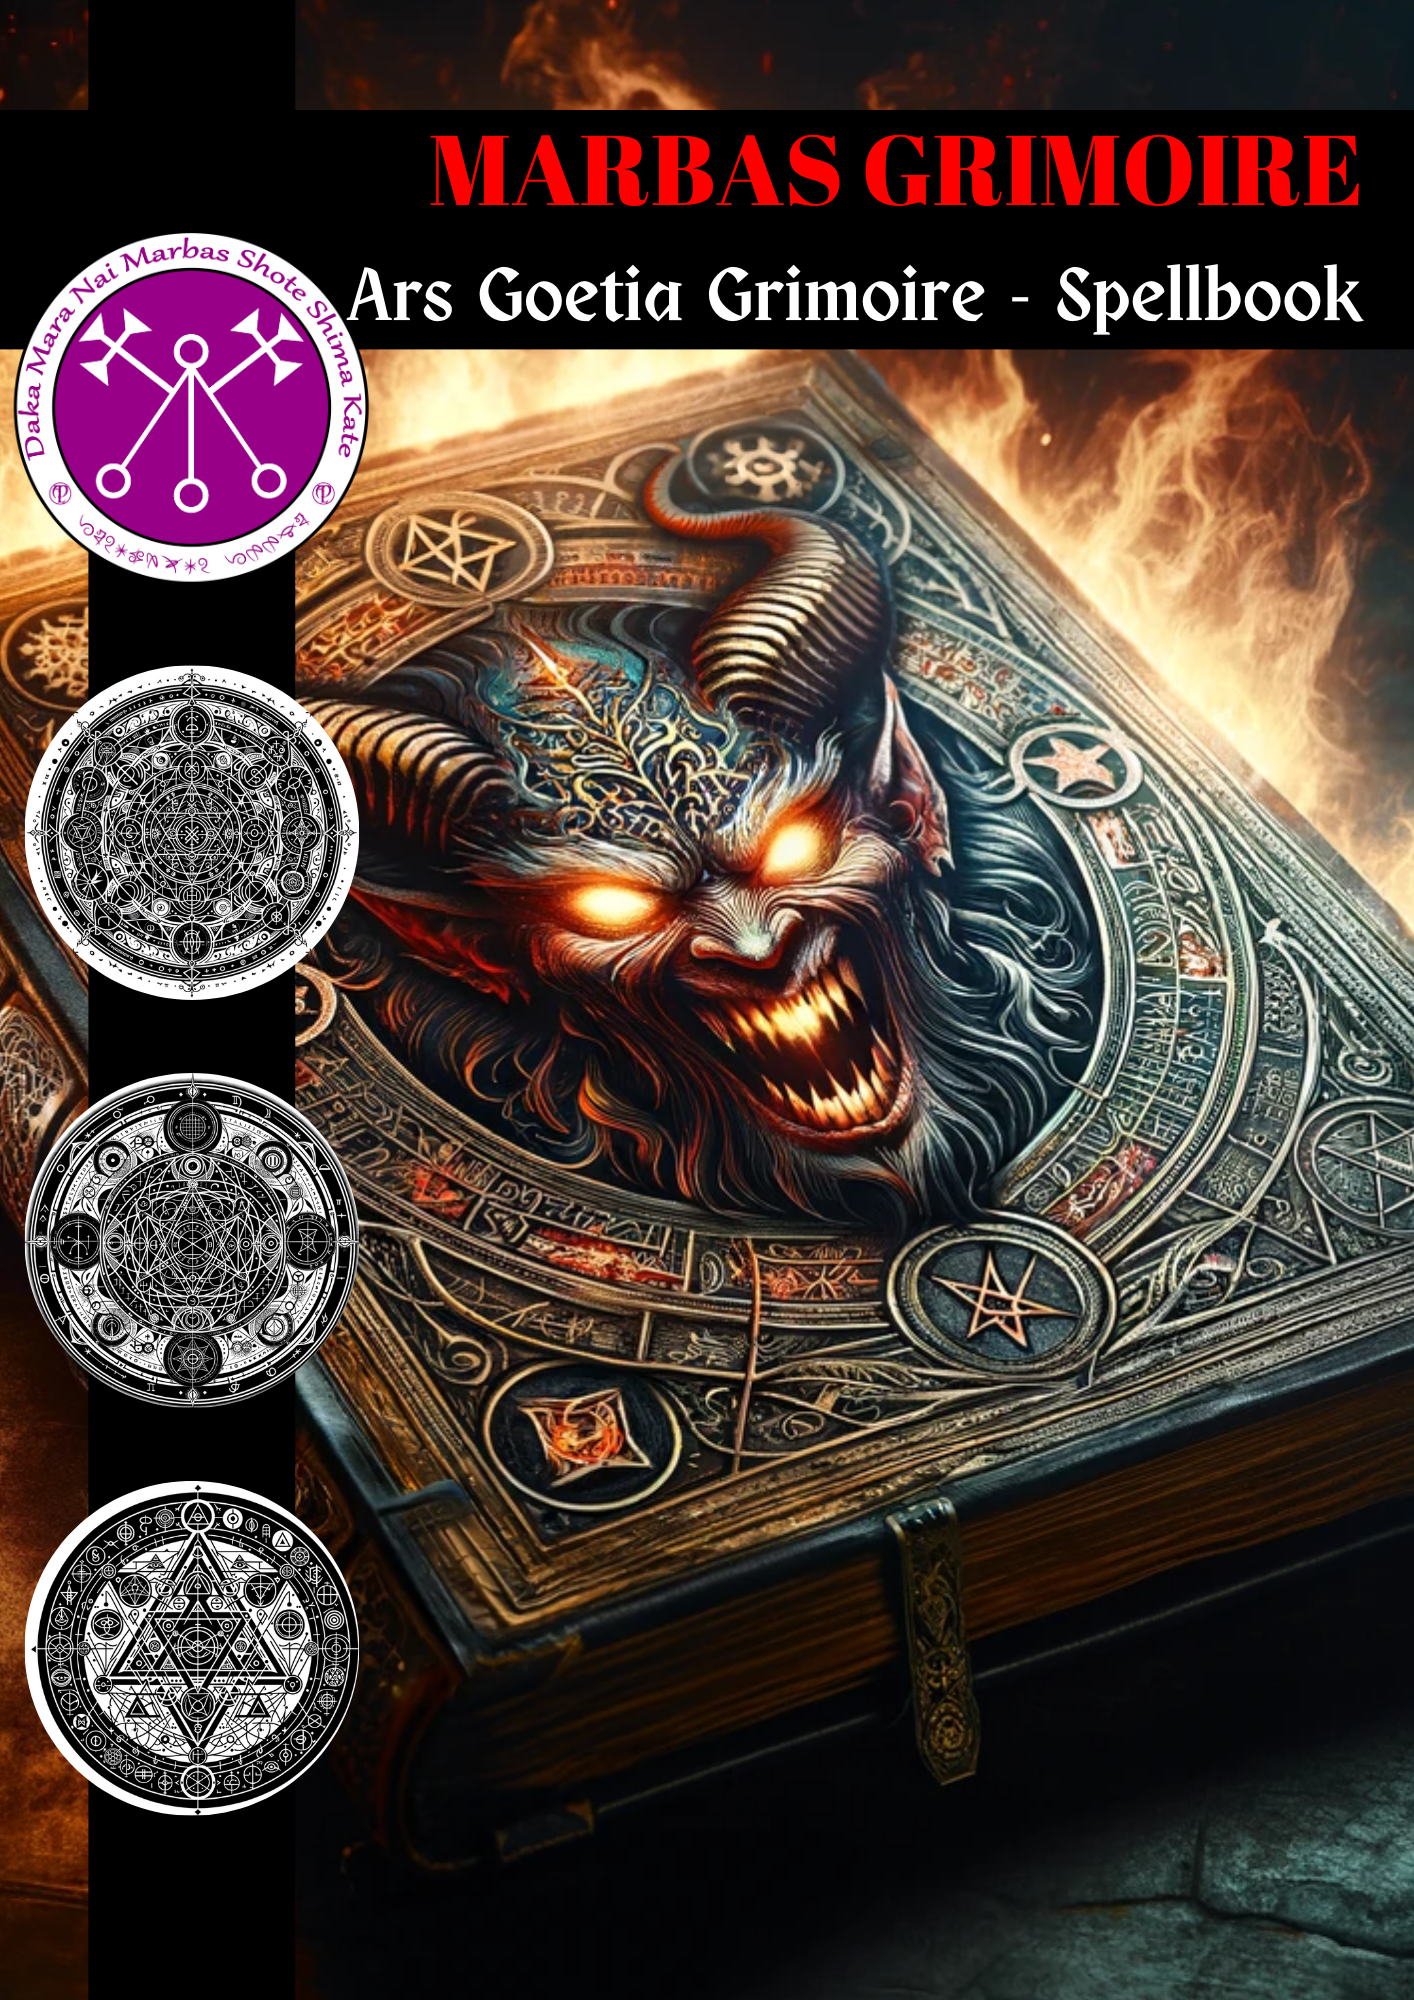 Grimoire of Marbas Spells & Rituals for all kinds of healing - Abraxas Amulets ® Magic ♾️ Talismans ♾️ ආරම්භ කිරීම්